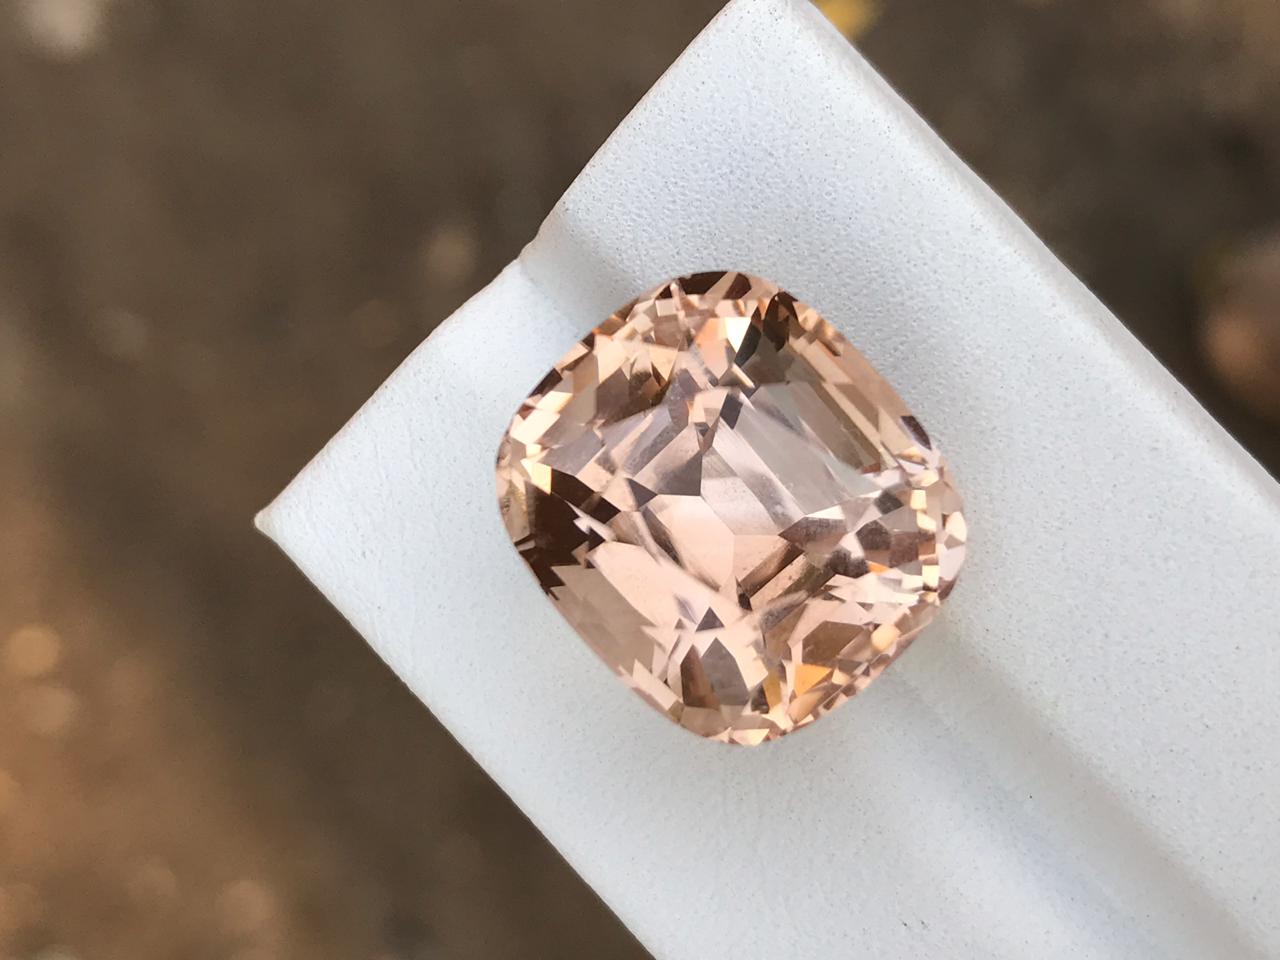 29.30 ct Faceted Imperial Topaz for sale